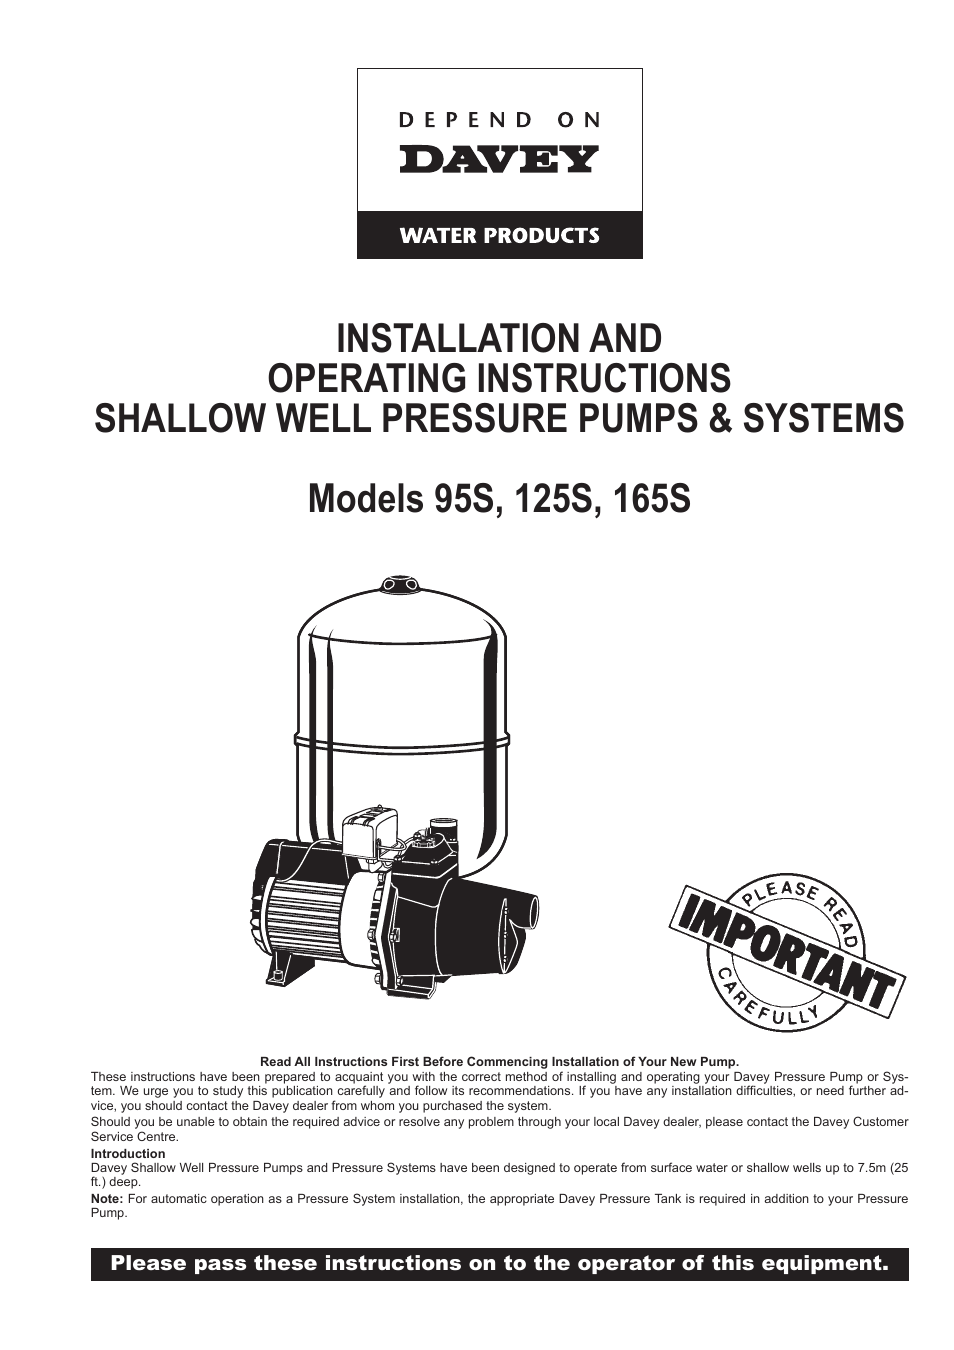 95S SHALLOW WELL PRESSURE PUMPS & SYSTEMS